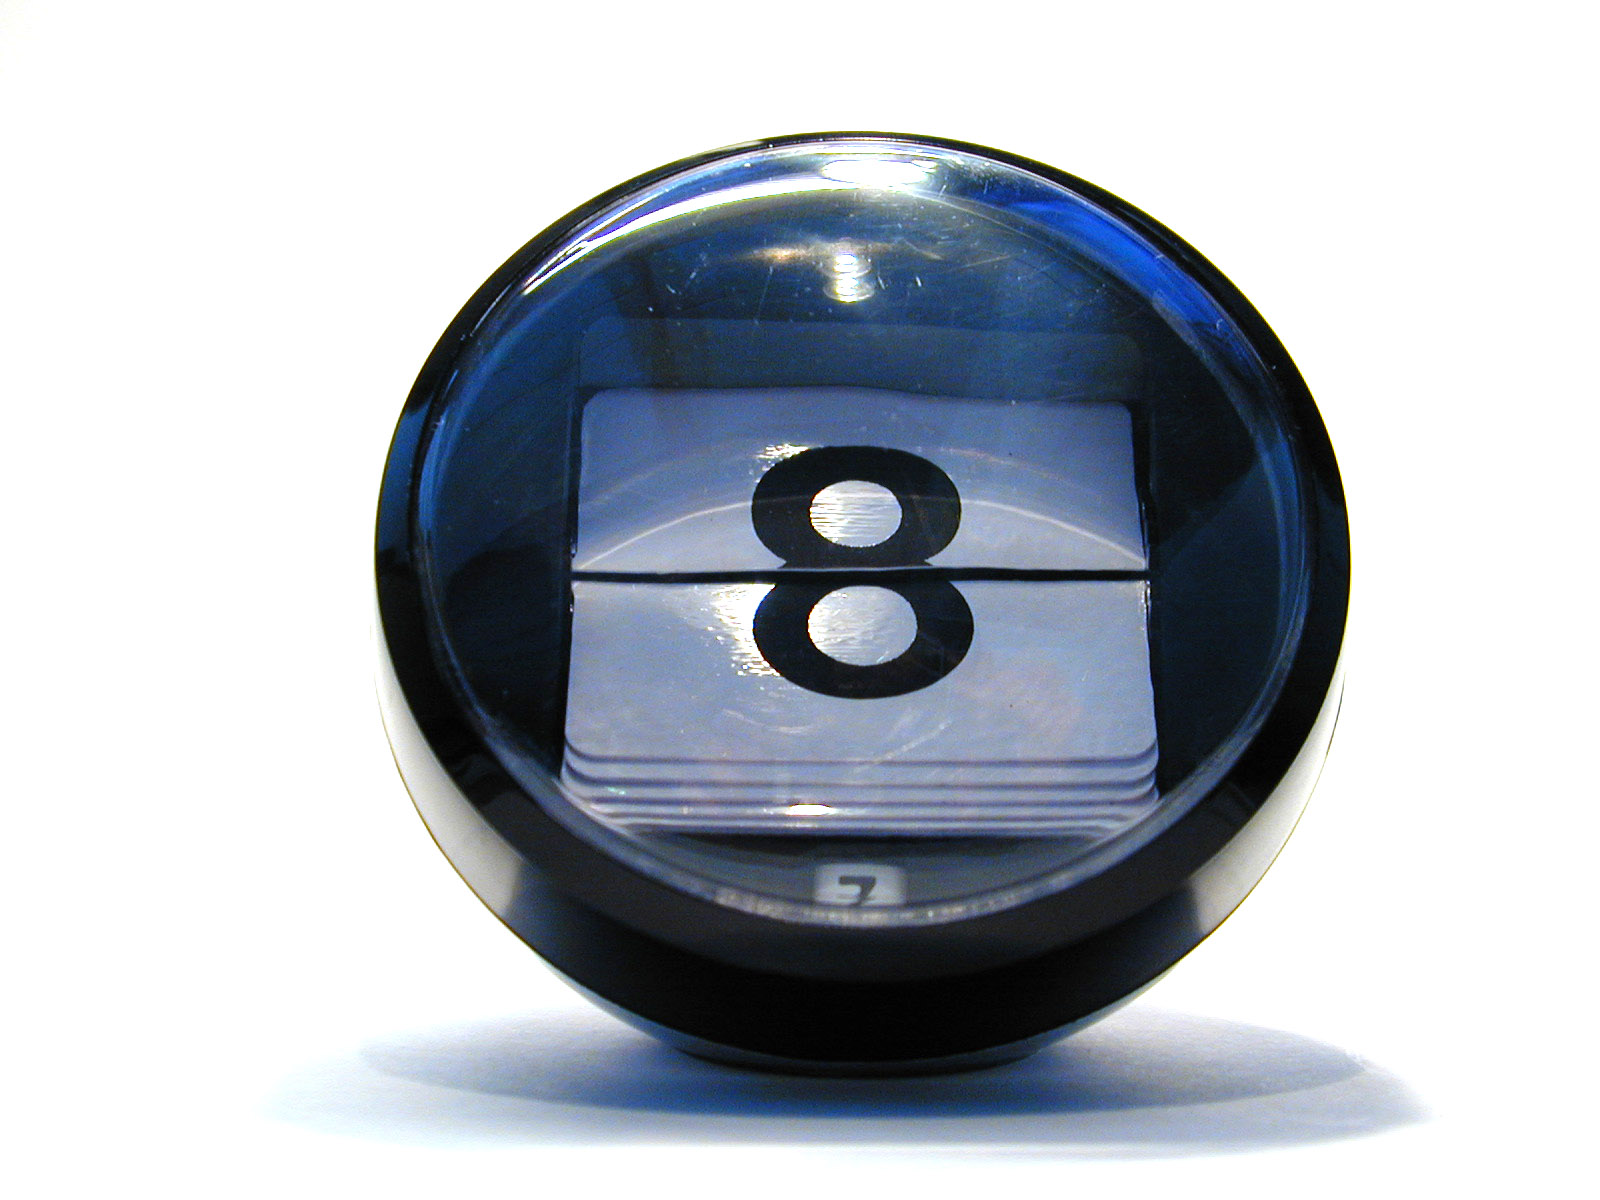 eightball calendar typo tyopgraphy numbers eight 8 plastic sphere object